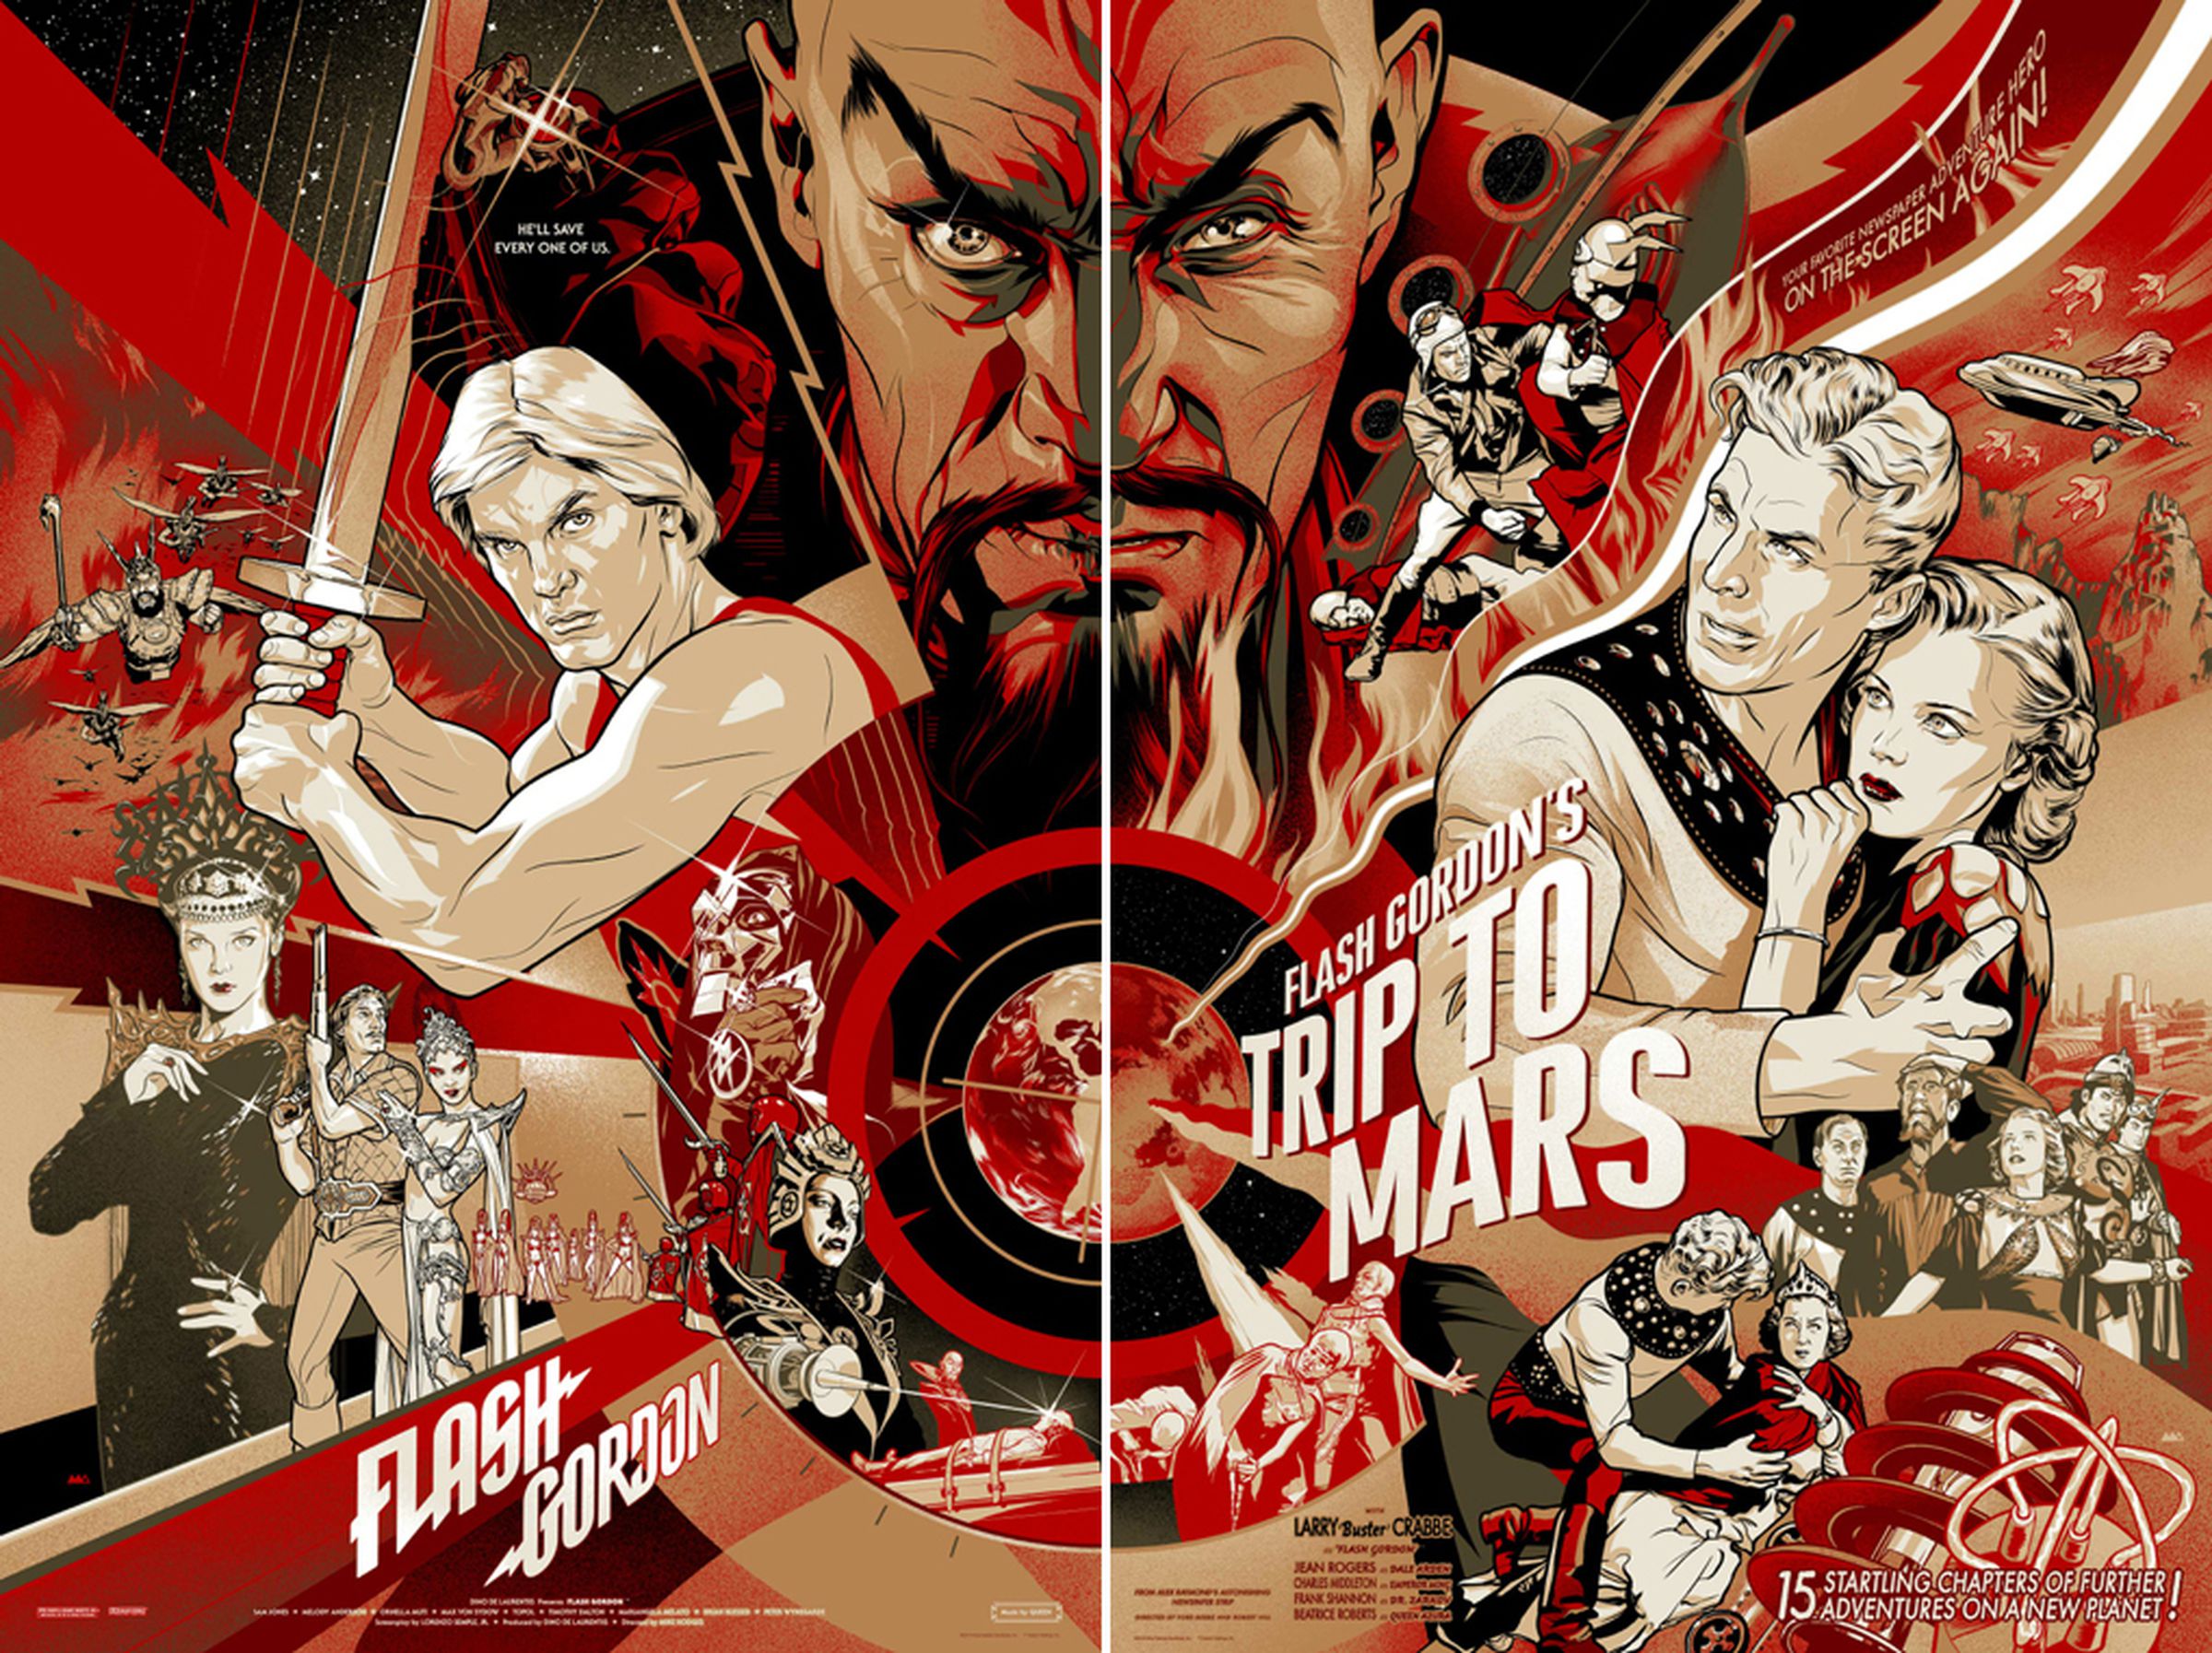 Mondo sci-fi movie poster exhibit with Kevin Tong and Martin Ansin